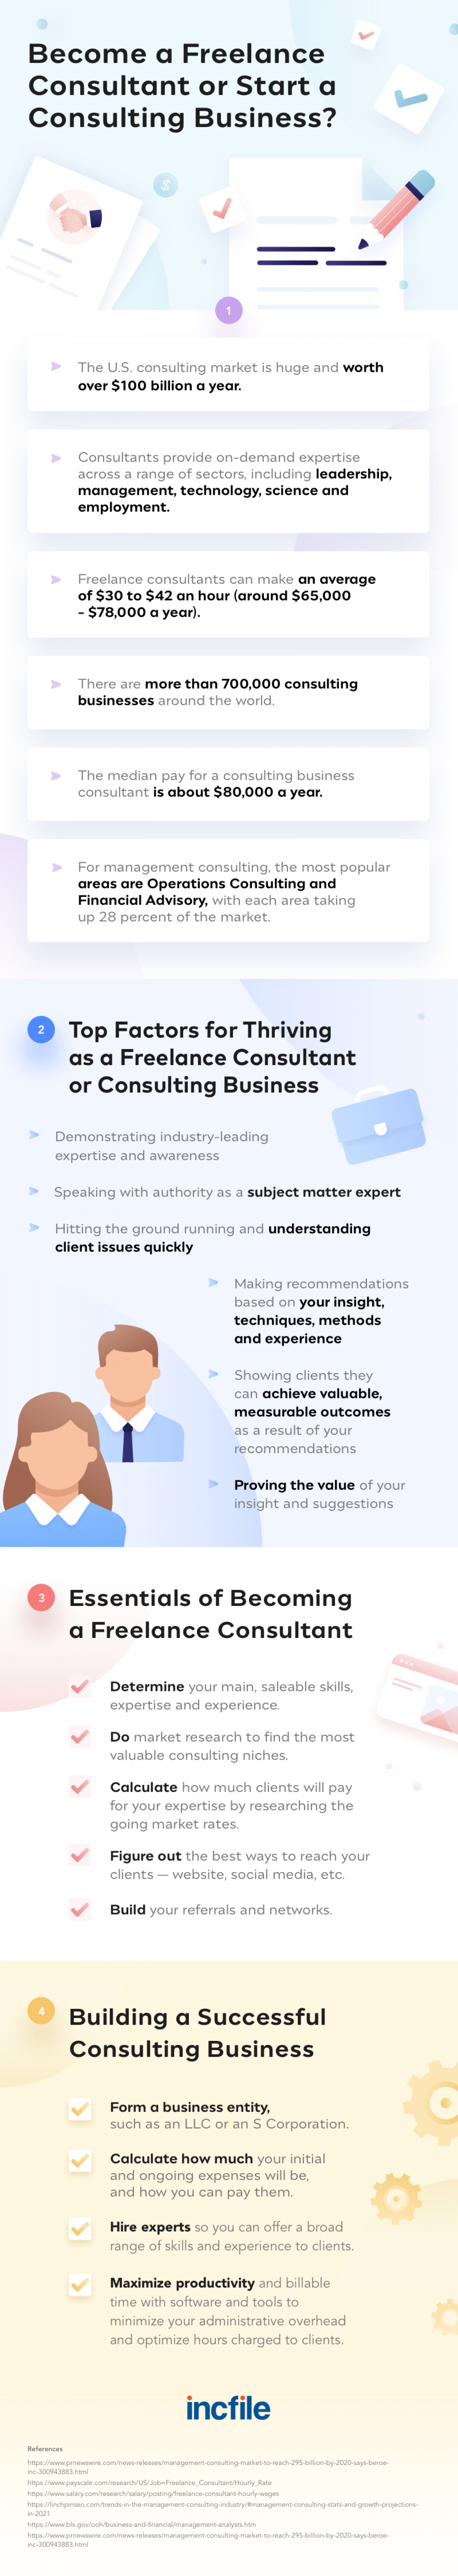 Should I be a Freelance Consultant or Start a Consulting Business? Infographic